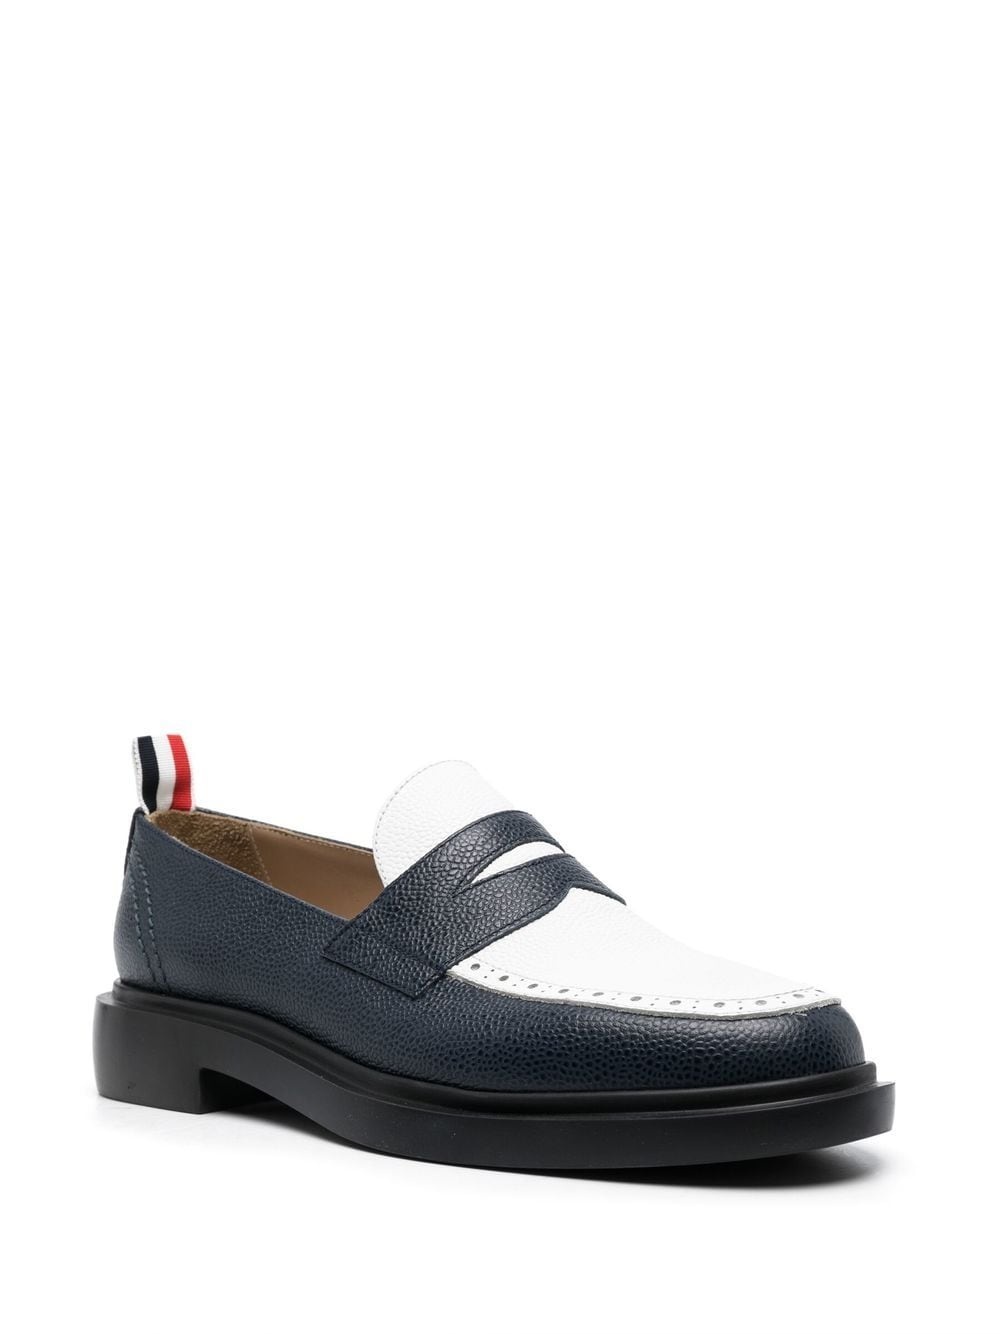 classic lightweight penny loafers - 2